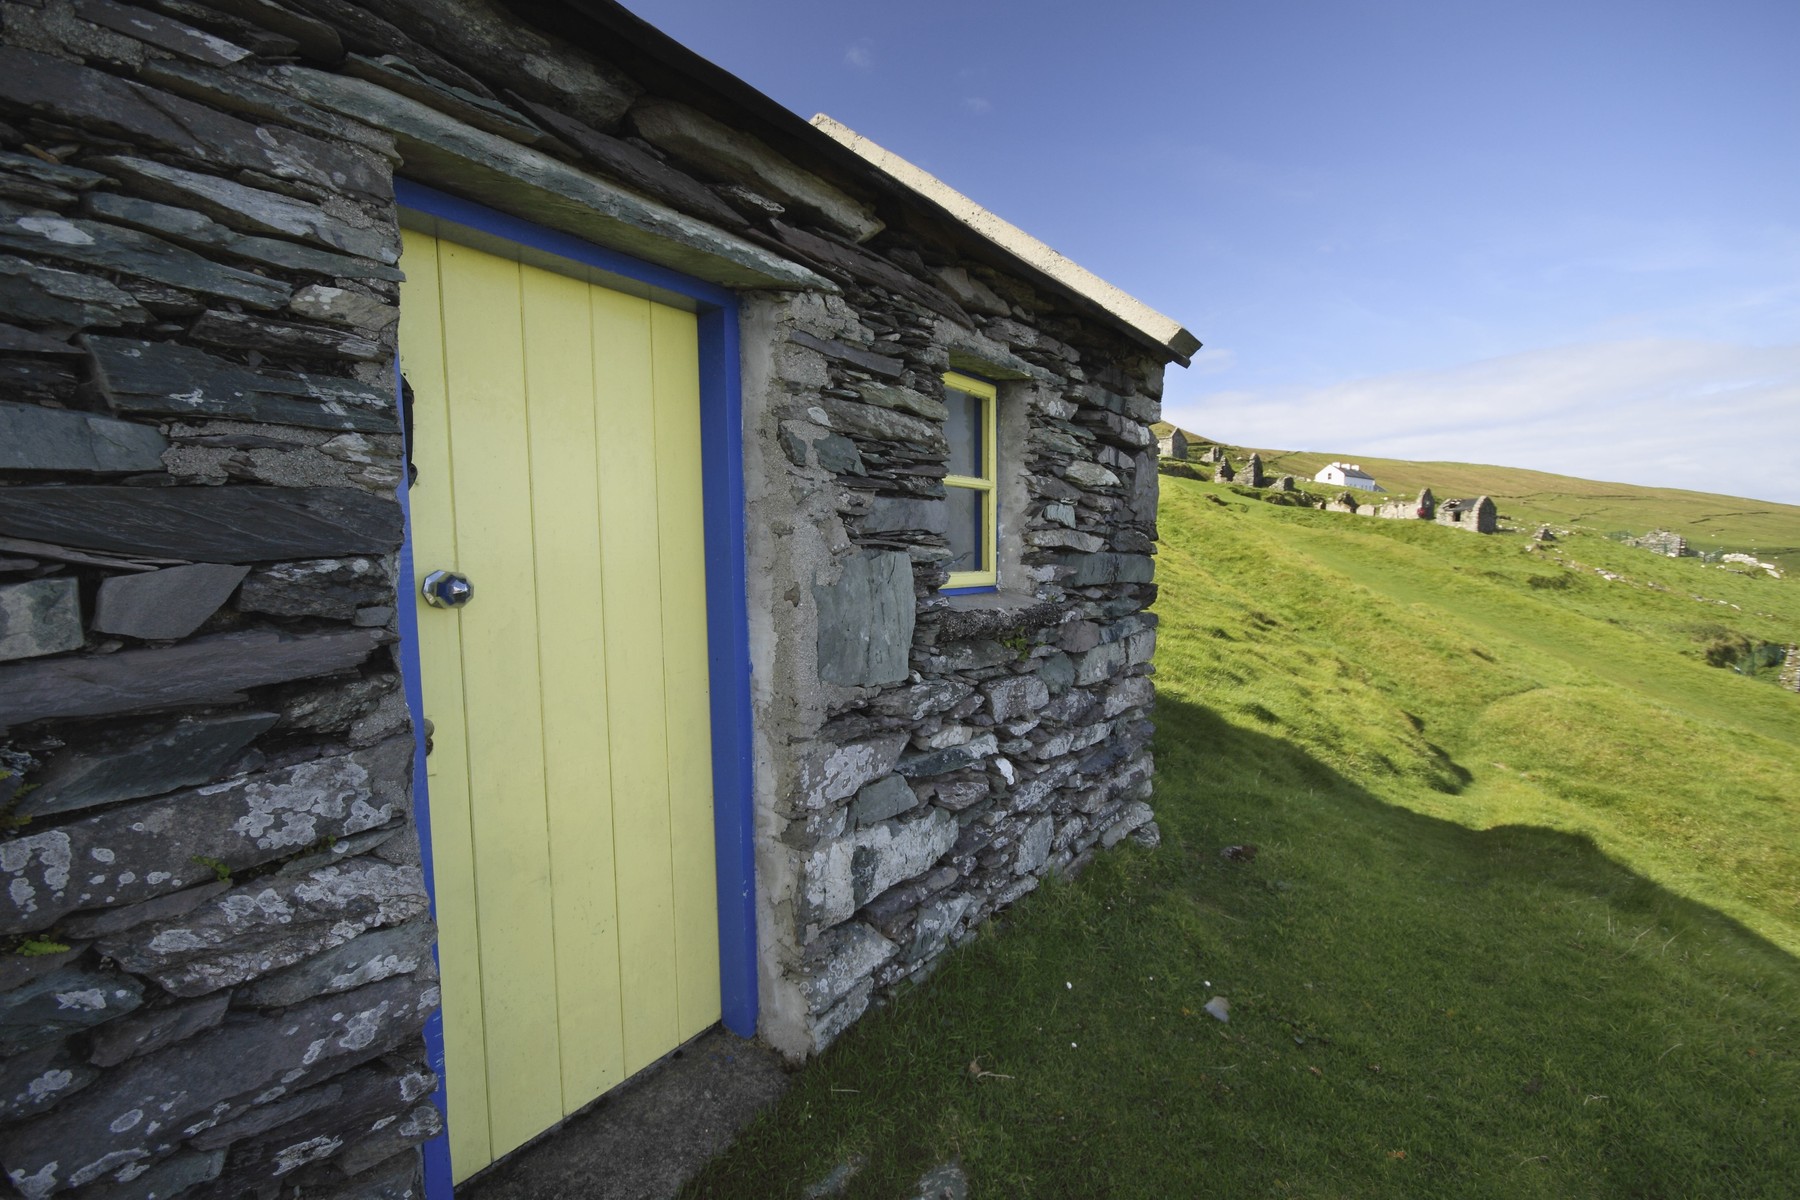 September 17, 2010, Kerry County, Ireland: Stone Cottage On Blasket Island In Munster Region; County Kerry, Ireland, Image: 492996554, License: Rights-managed, Restrictions: , Model Release: no, Credit line: Trish Punch / Zuma Press / Profimedia